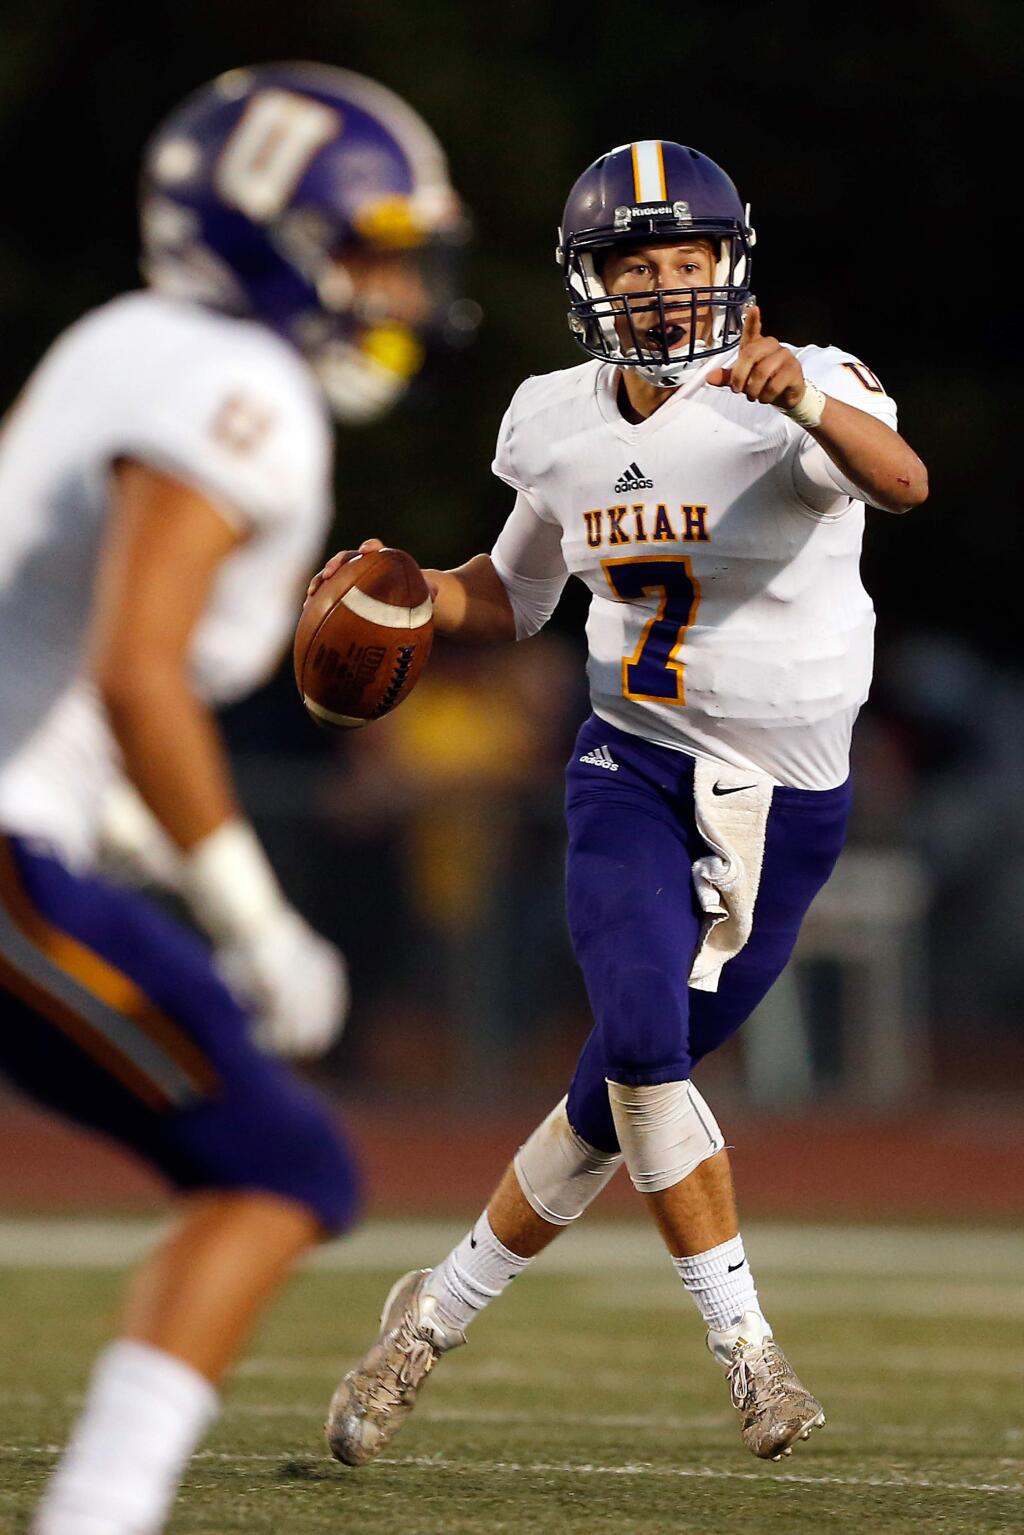 Ukiah quarterback Nate Johnson looks to pass as he scrambles out of the pocket during the first half between Ukiah and Santa Rosa high schools in Santa Rosa on Friday, Aug. 31, 2018. (Alvin Jornada / The Press Democrat)